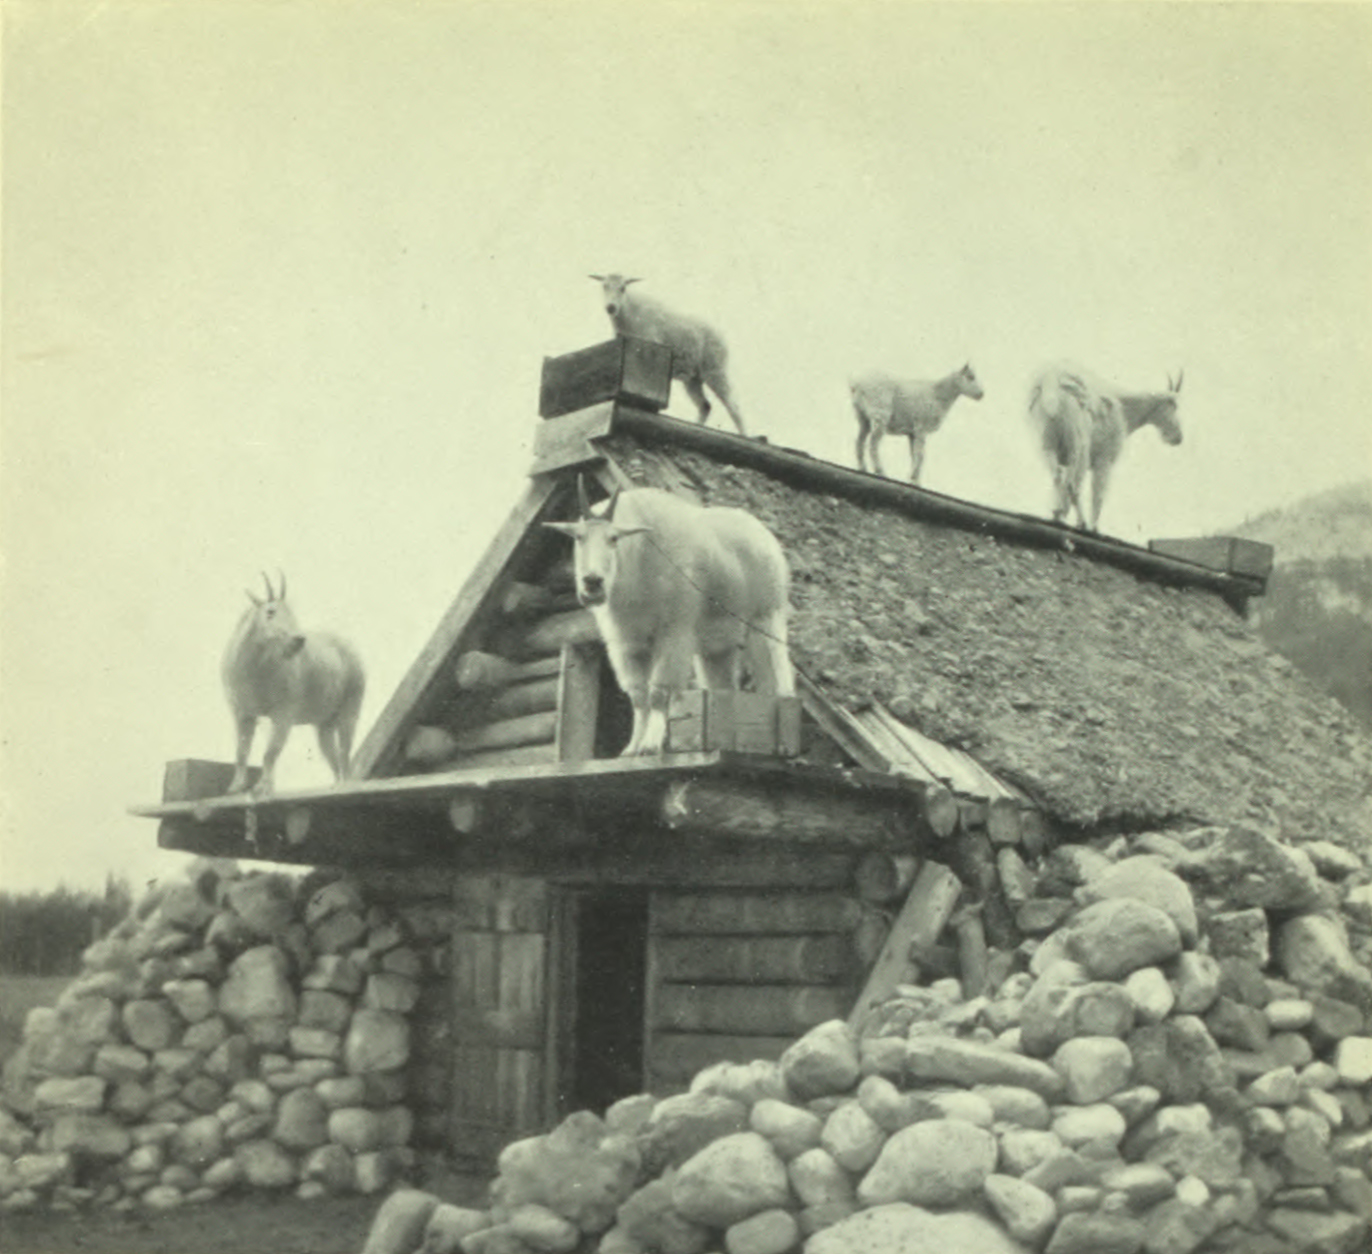 Goats all over the roof of a cabin.